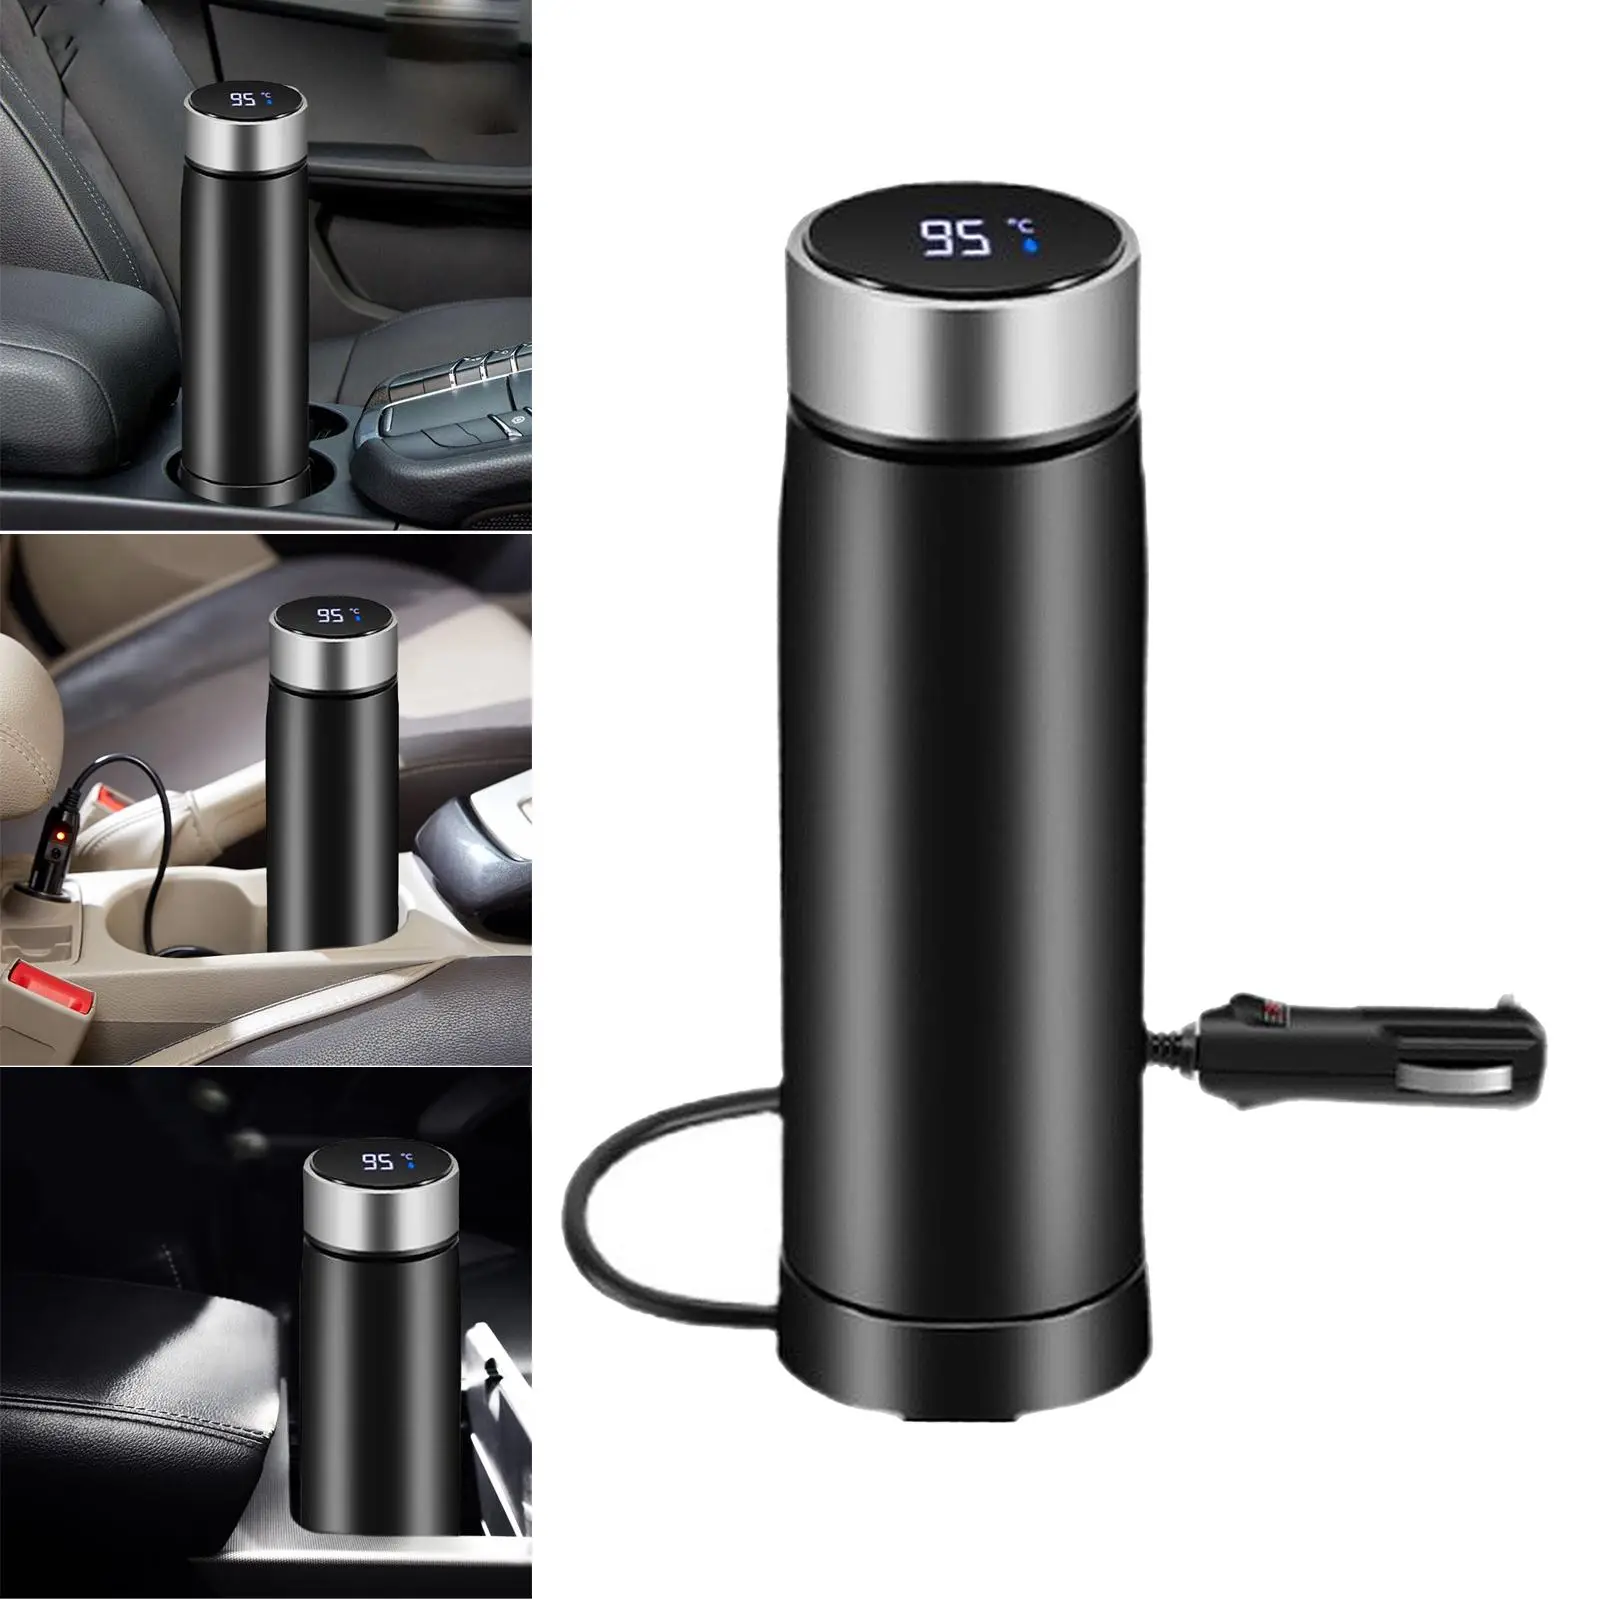 12 Heating Cup Insulated Cup Heater Car Bottle Warmer for Keep Warm Travel